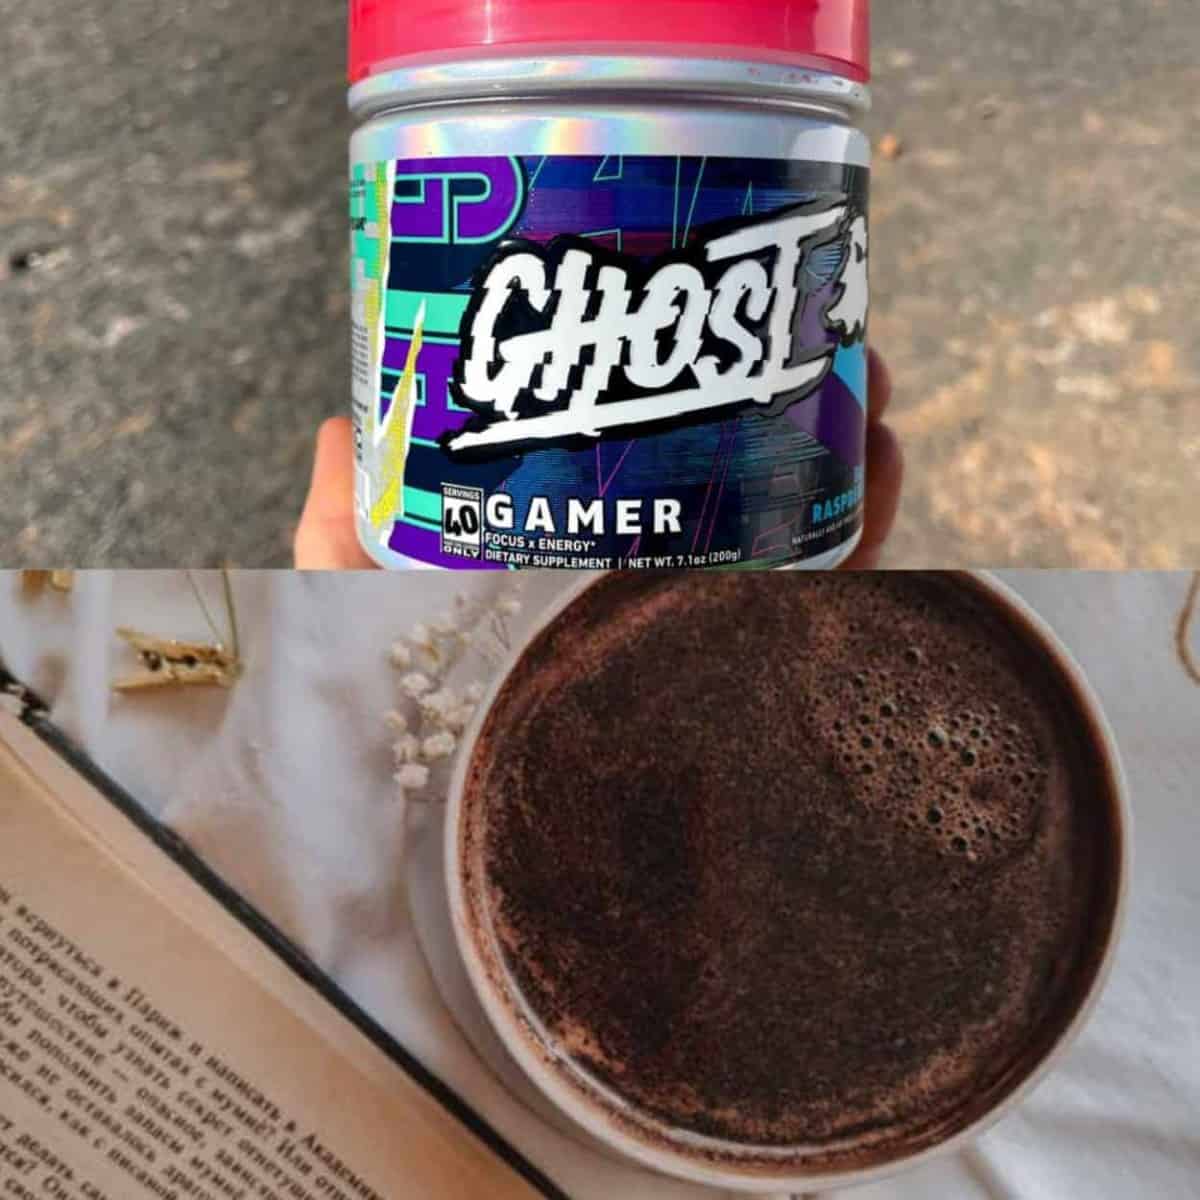 Comparison pic of both ghost energy and coffee